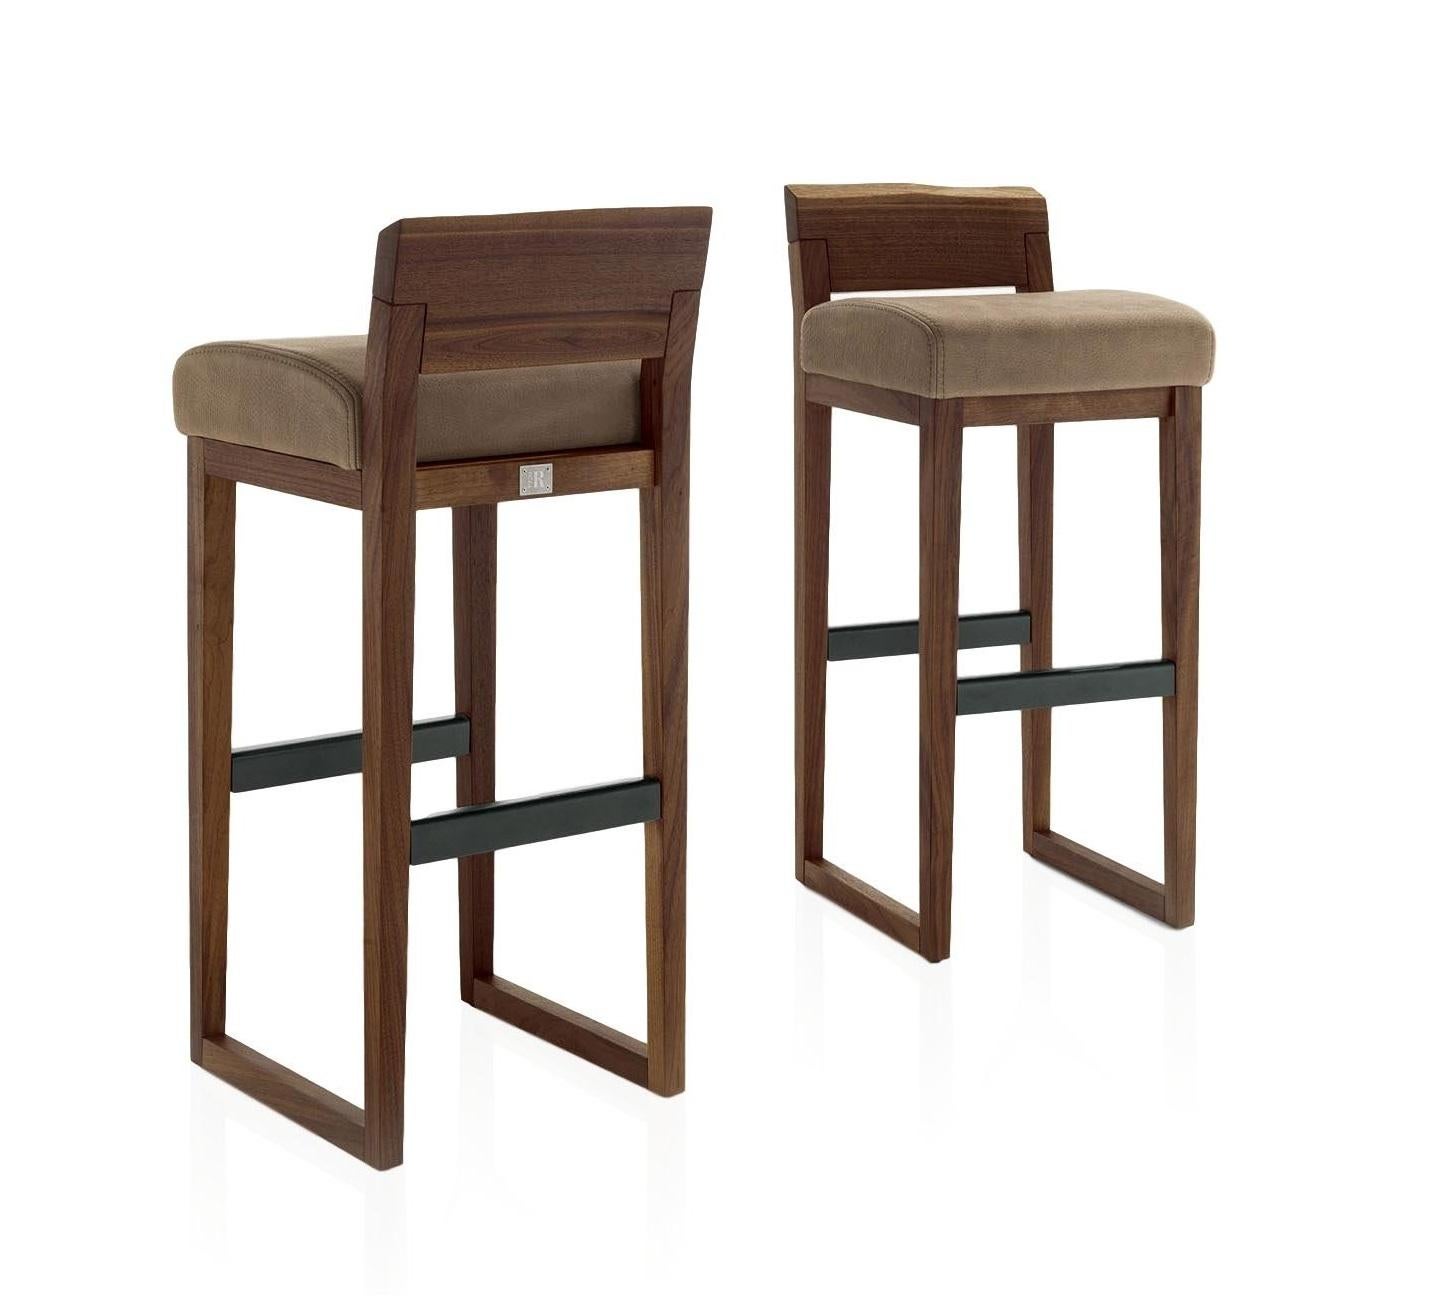 Handcrafted set of 2 bar or counter stools, characterized by a structure in solid American walnut and backrest with a natural edge. Upholstered seat in Italian Utah leather.
Available in two different heights upon request.
Made in Italy and priced